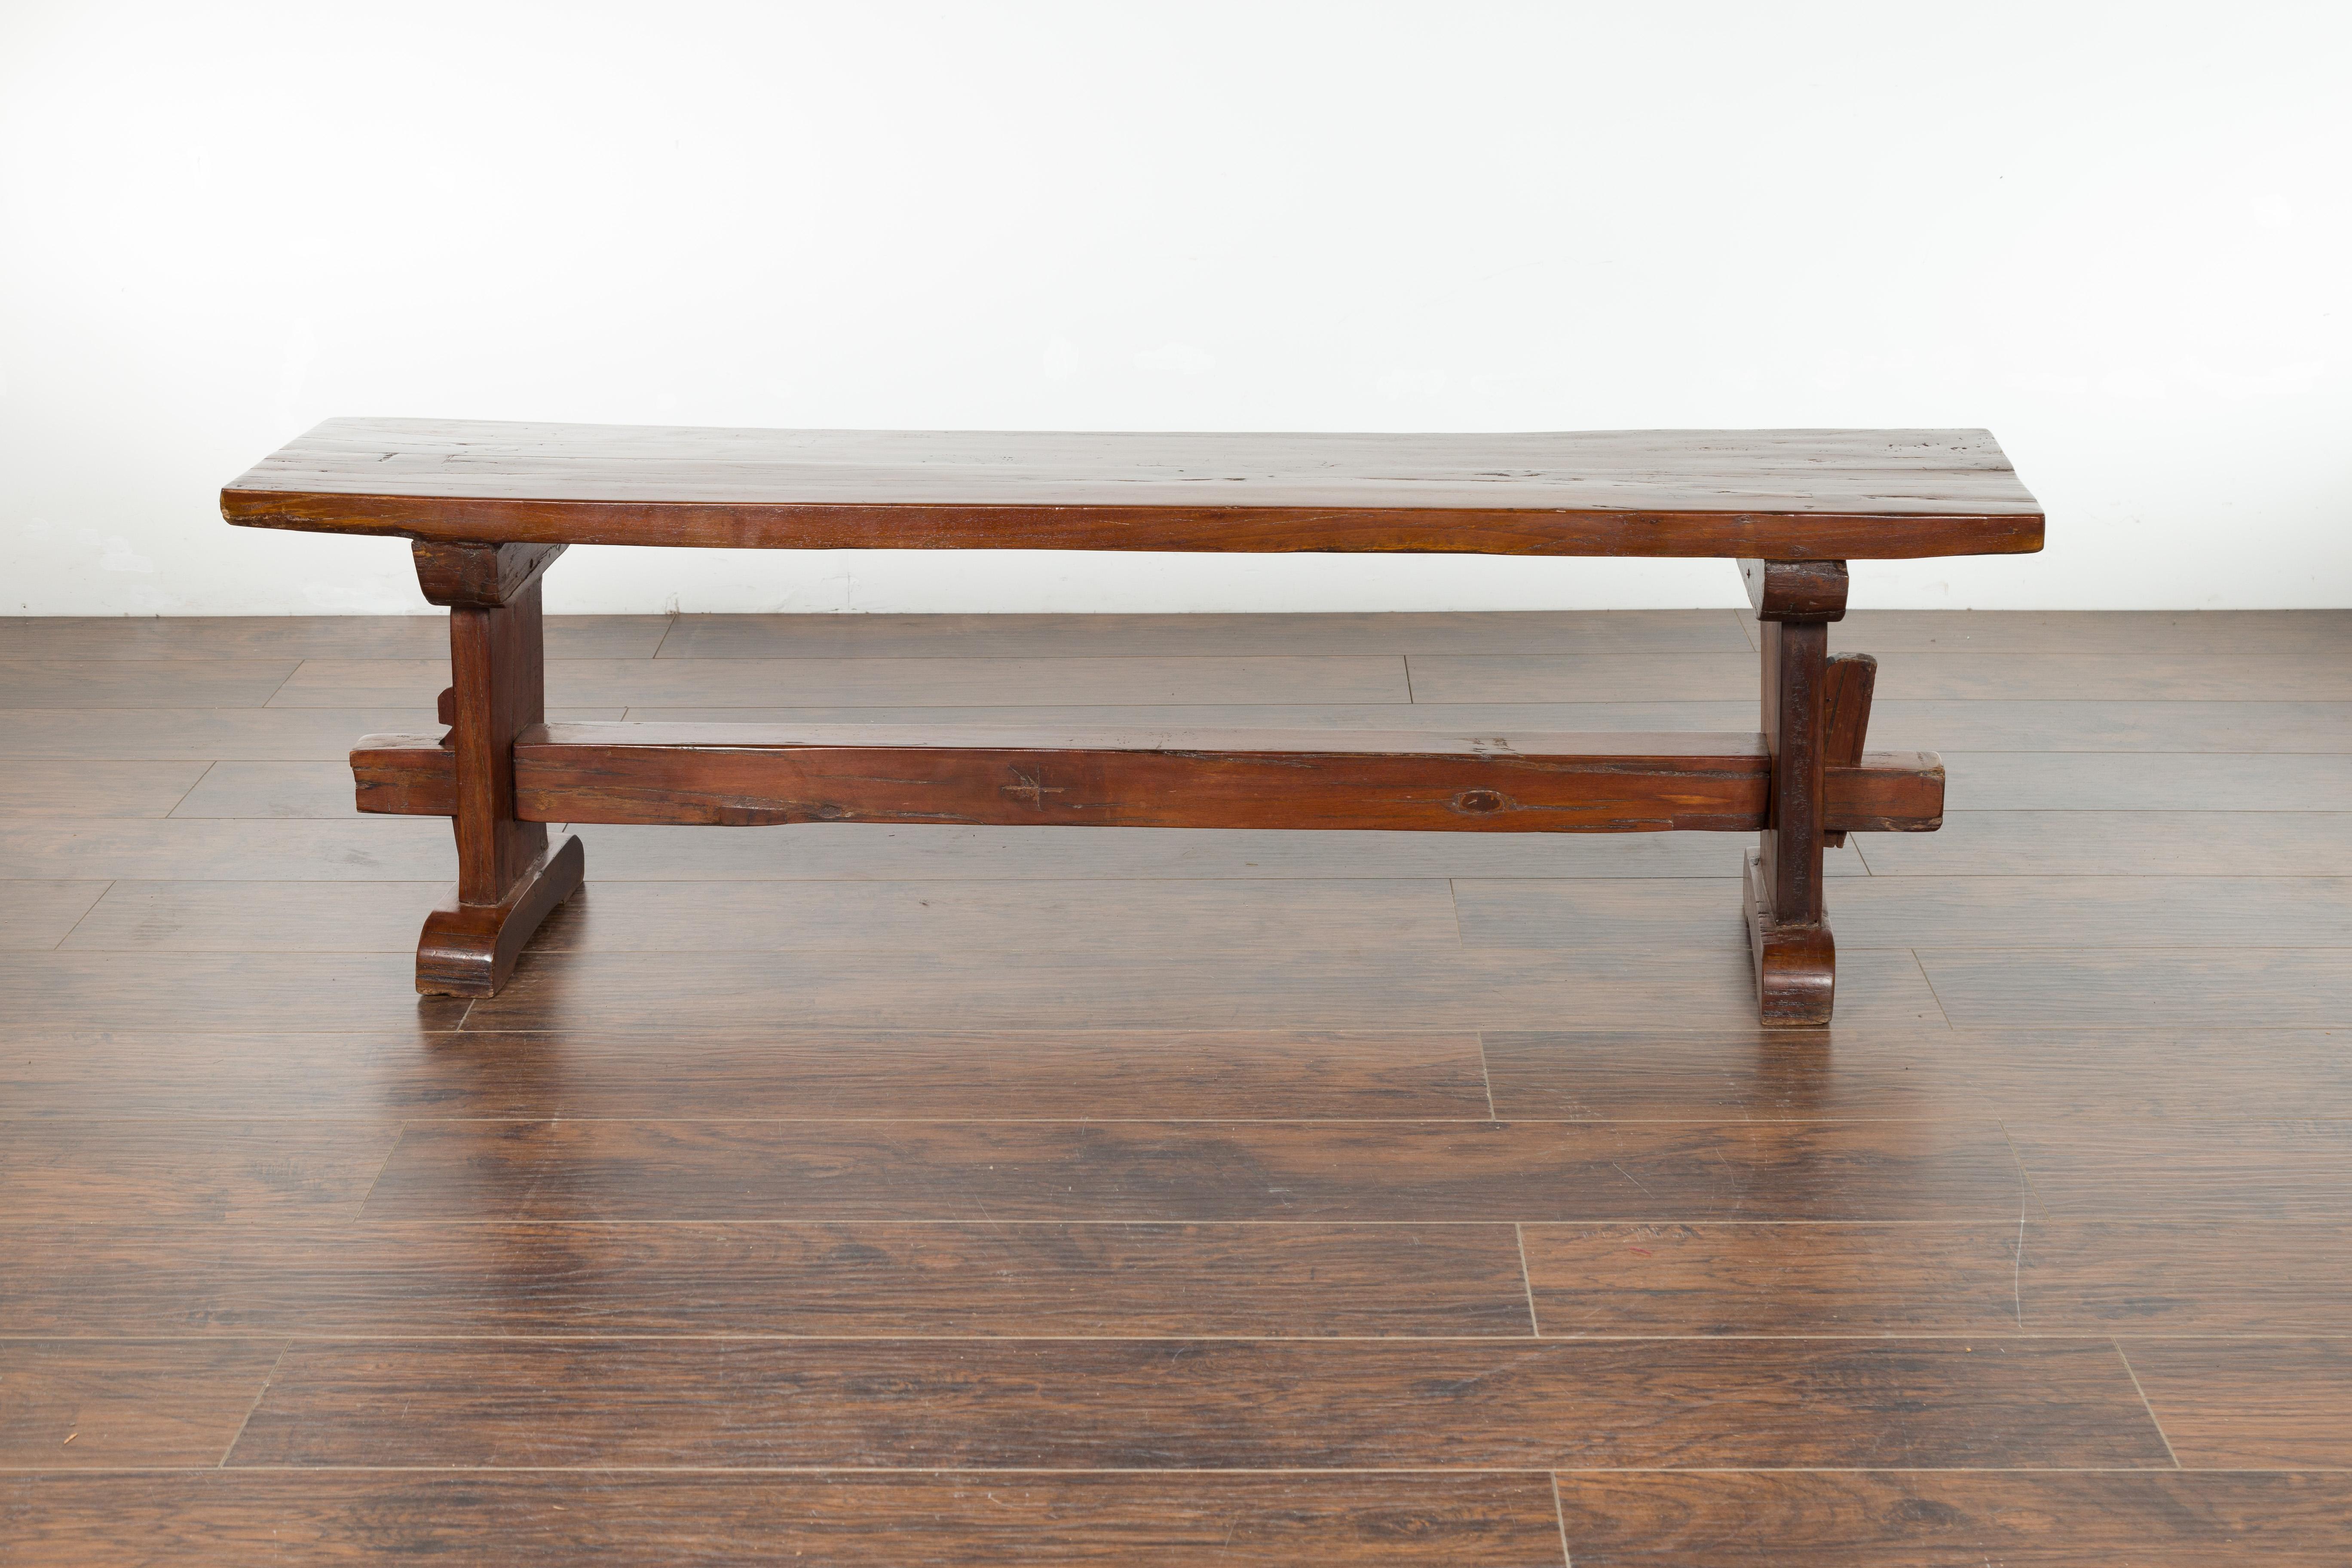 Italian Rustic Walnut Bench with Trestle Base from the Early 19th Century 7